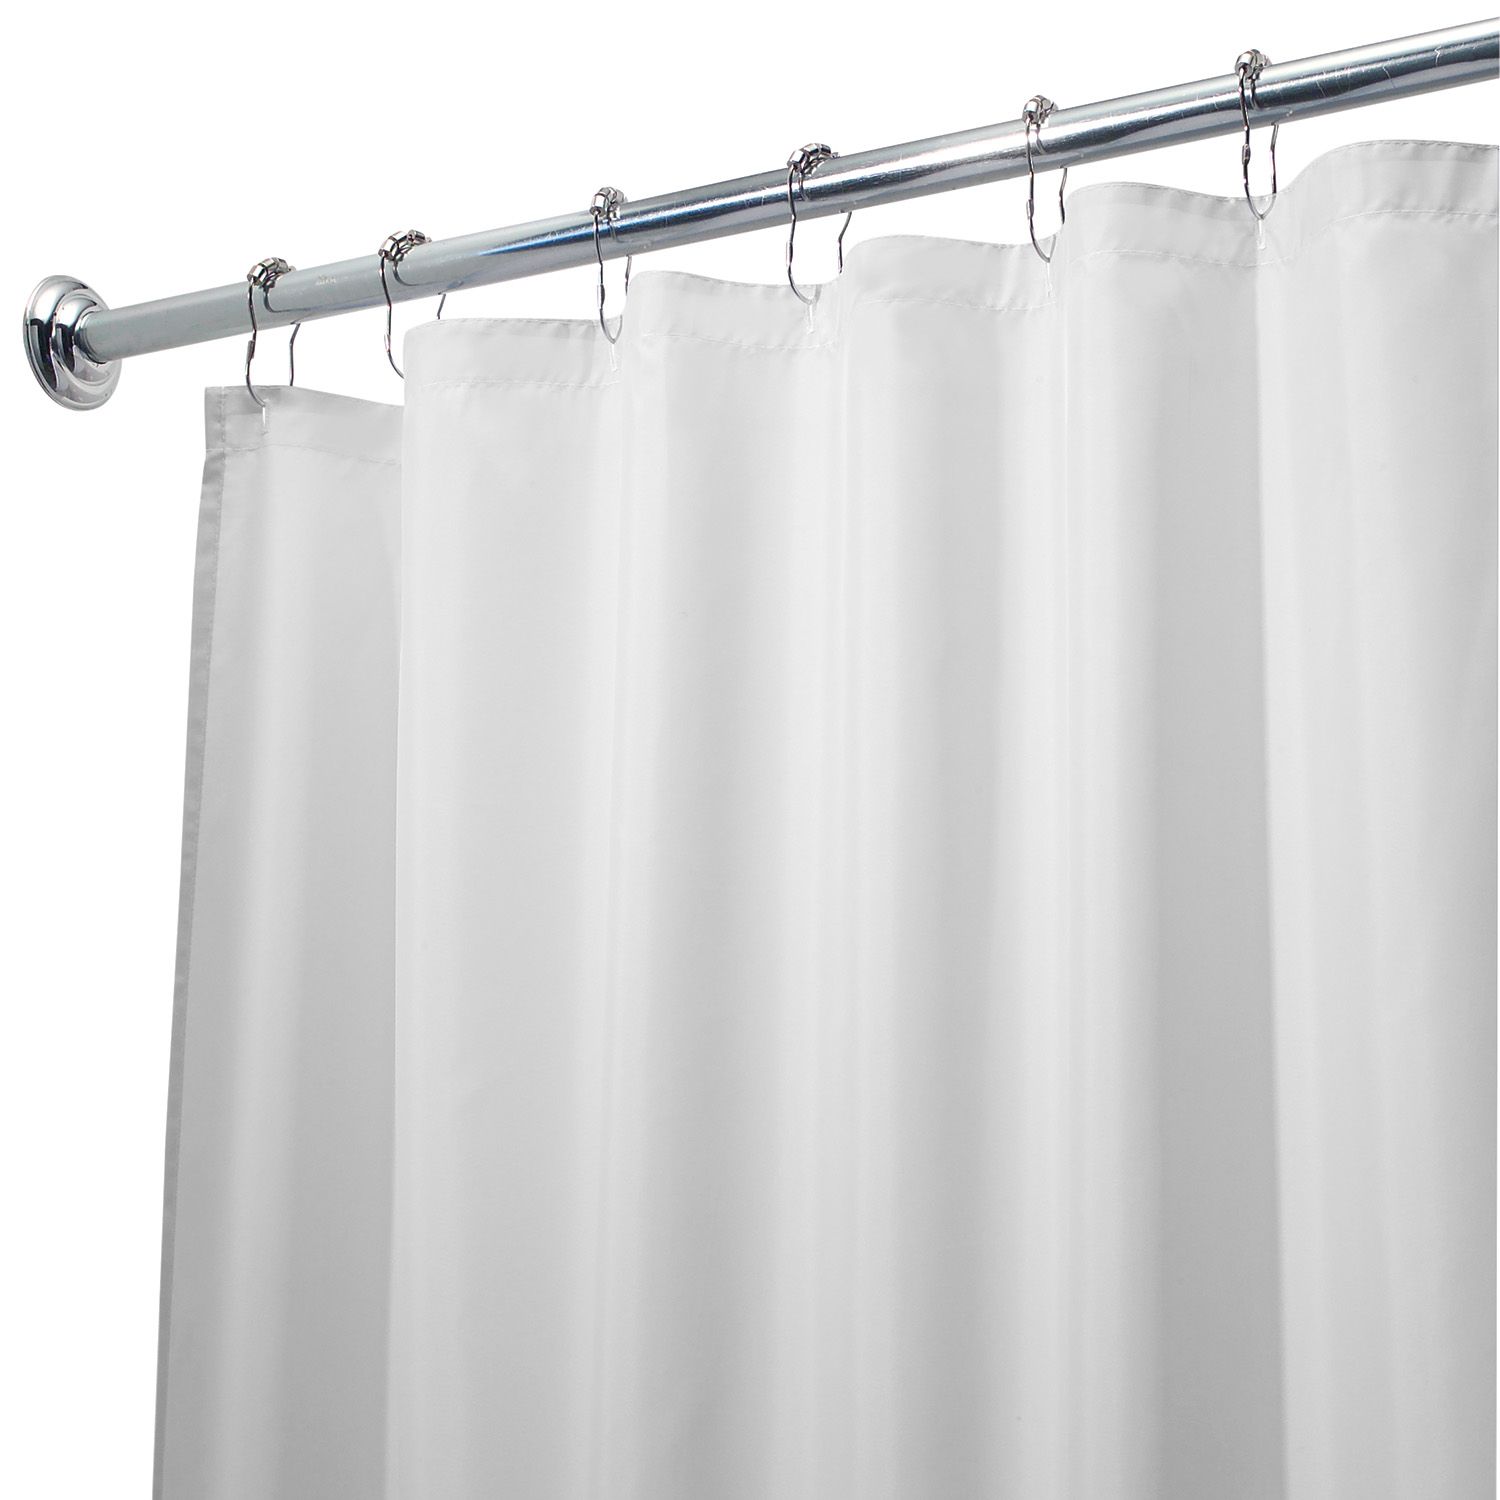 decorative shower liners